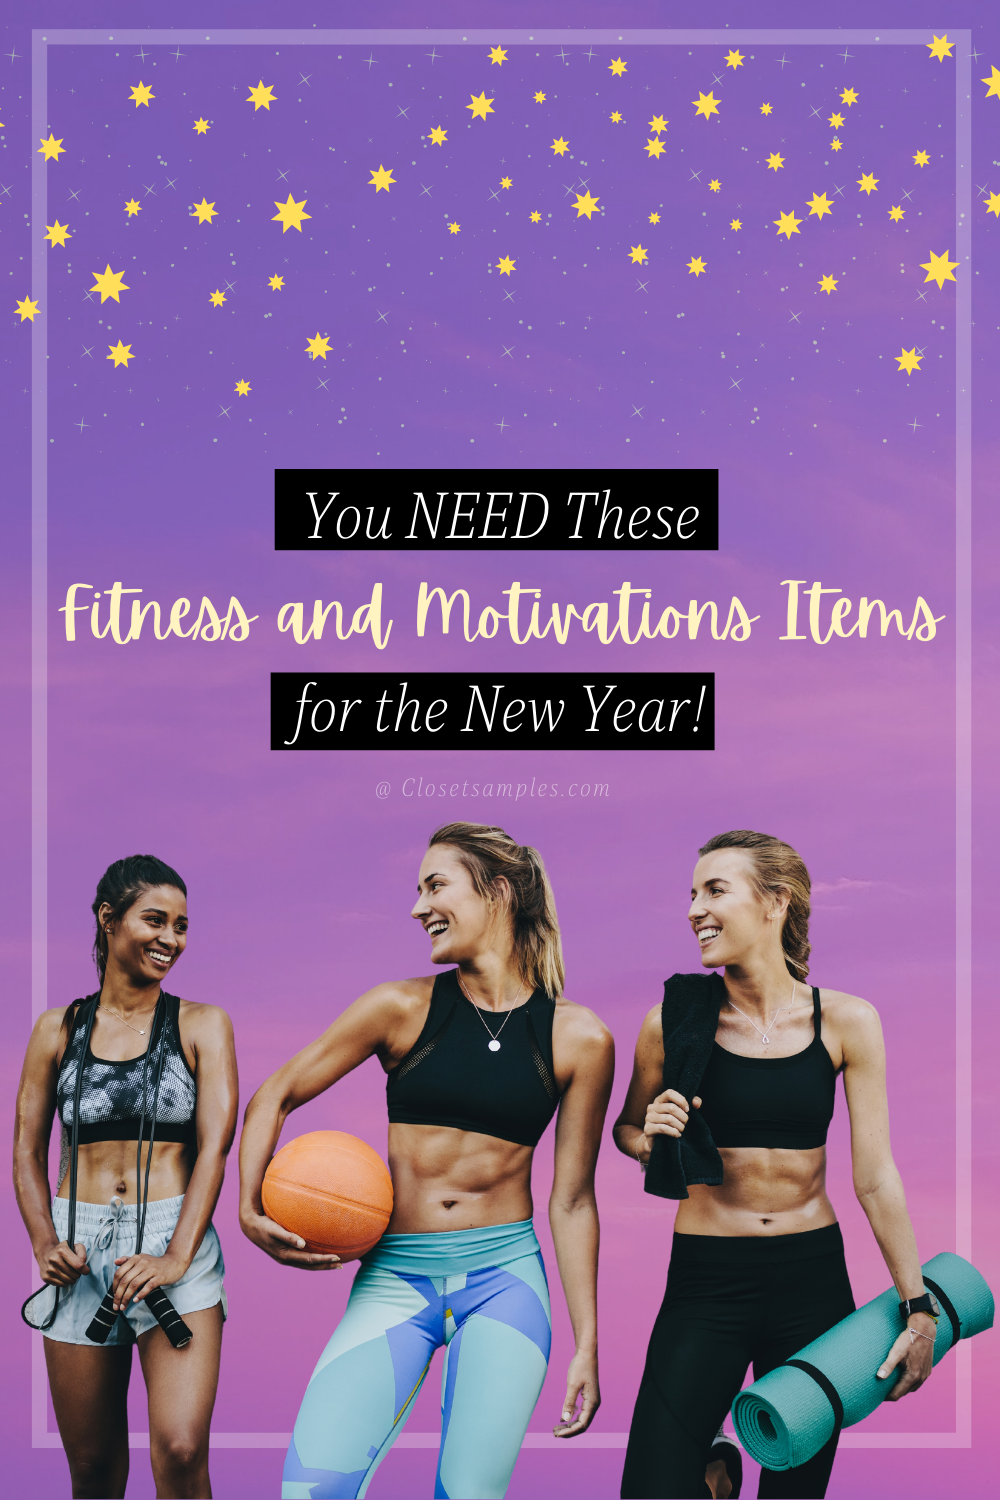 You NEED These Fitness and Motivations Items for the New Year Deal Genius Closetsamples